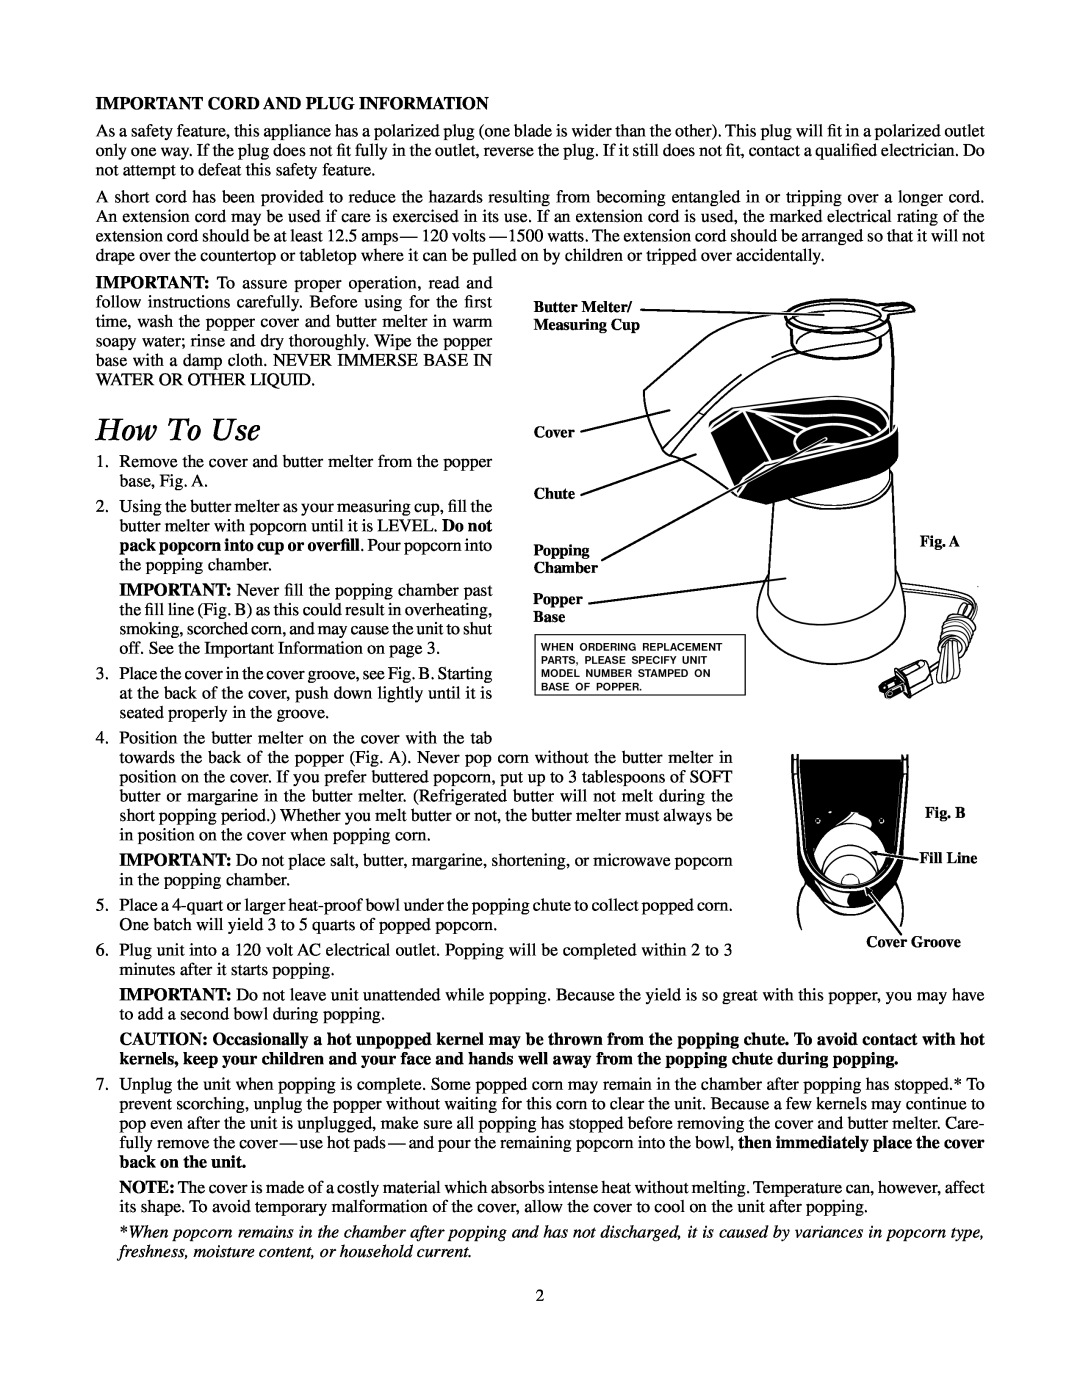 Presto Corn Popper manual How To Use, Important Cord And Plug Information 